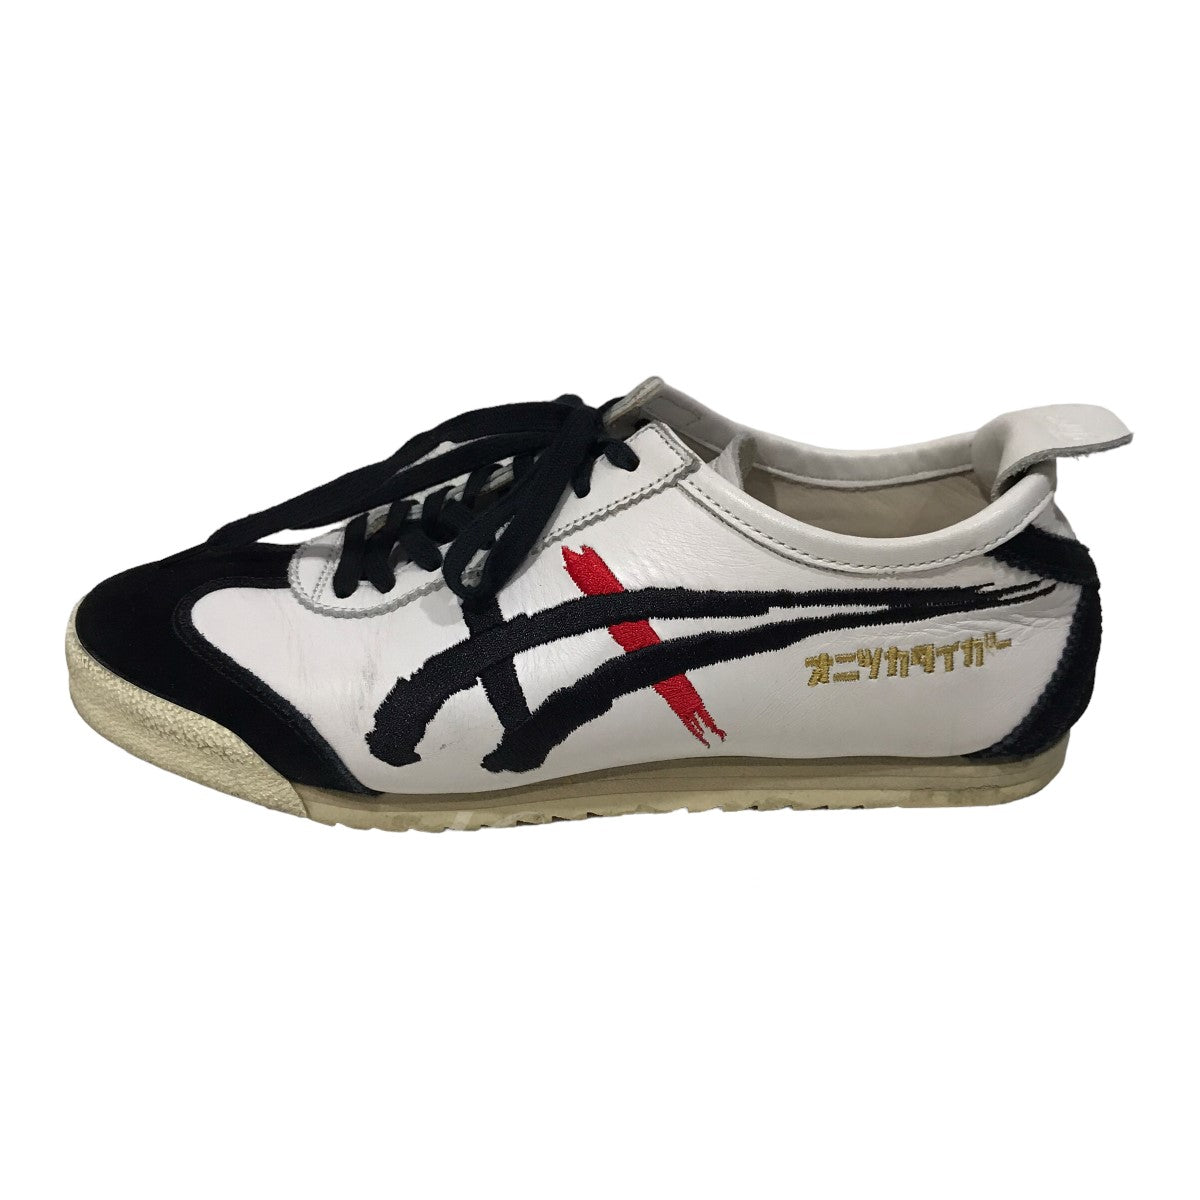 Onitsuka tiger(オニツカタイガー) スニーカー MEXICO 66 DELUXE 